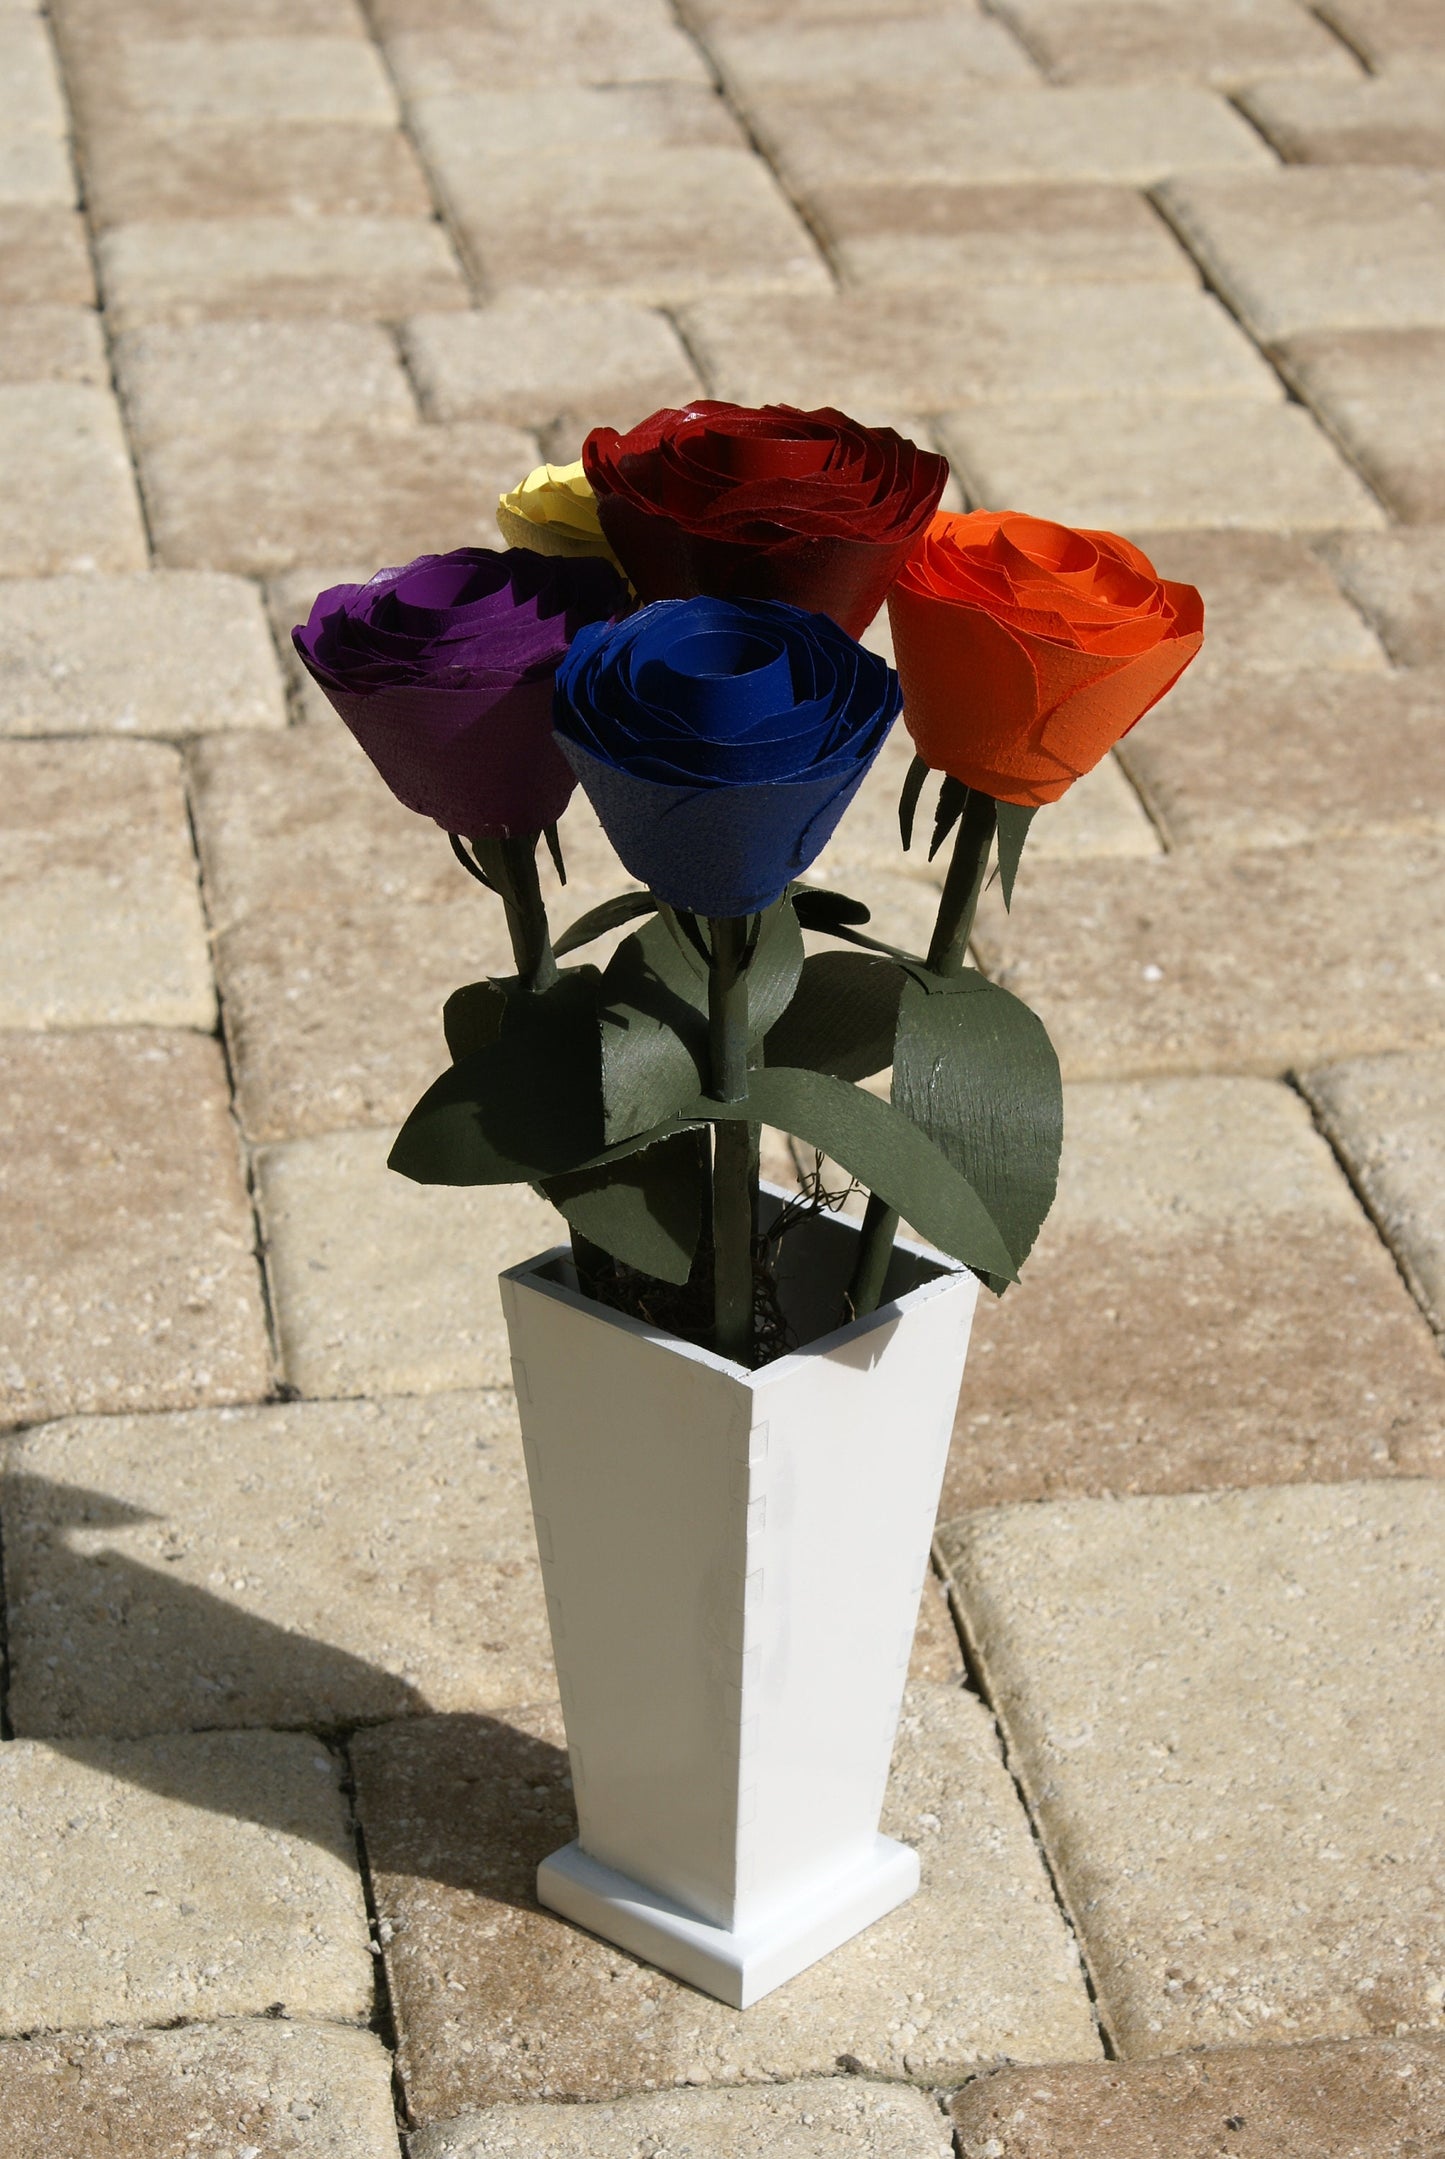 5 Rainbow color wood roses in white vase, Red, orange yellow blue and purple on green stems